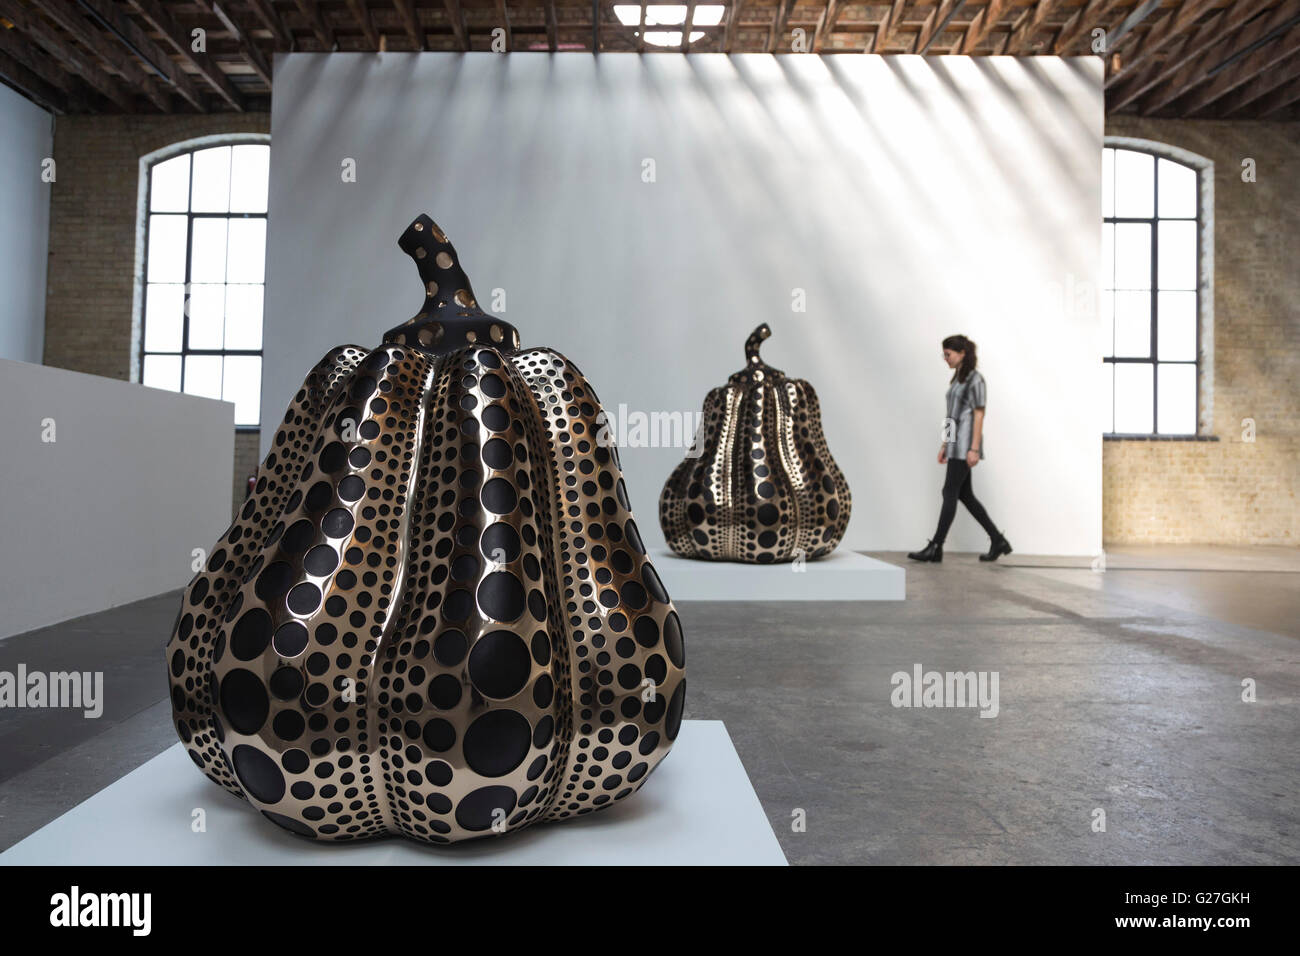 London, UK. 24 May 2016. Pumpkin, 2016, mirrored polished bronze. A new exhibition by Japanese artist Yayoi Kusama opens at all three locations of Victoria Miro Gallery in London and runs from 25 May to 30 July 2016. Stock Photo